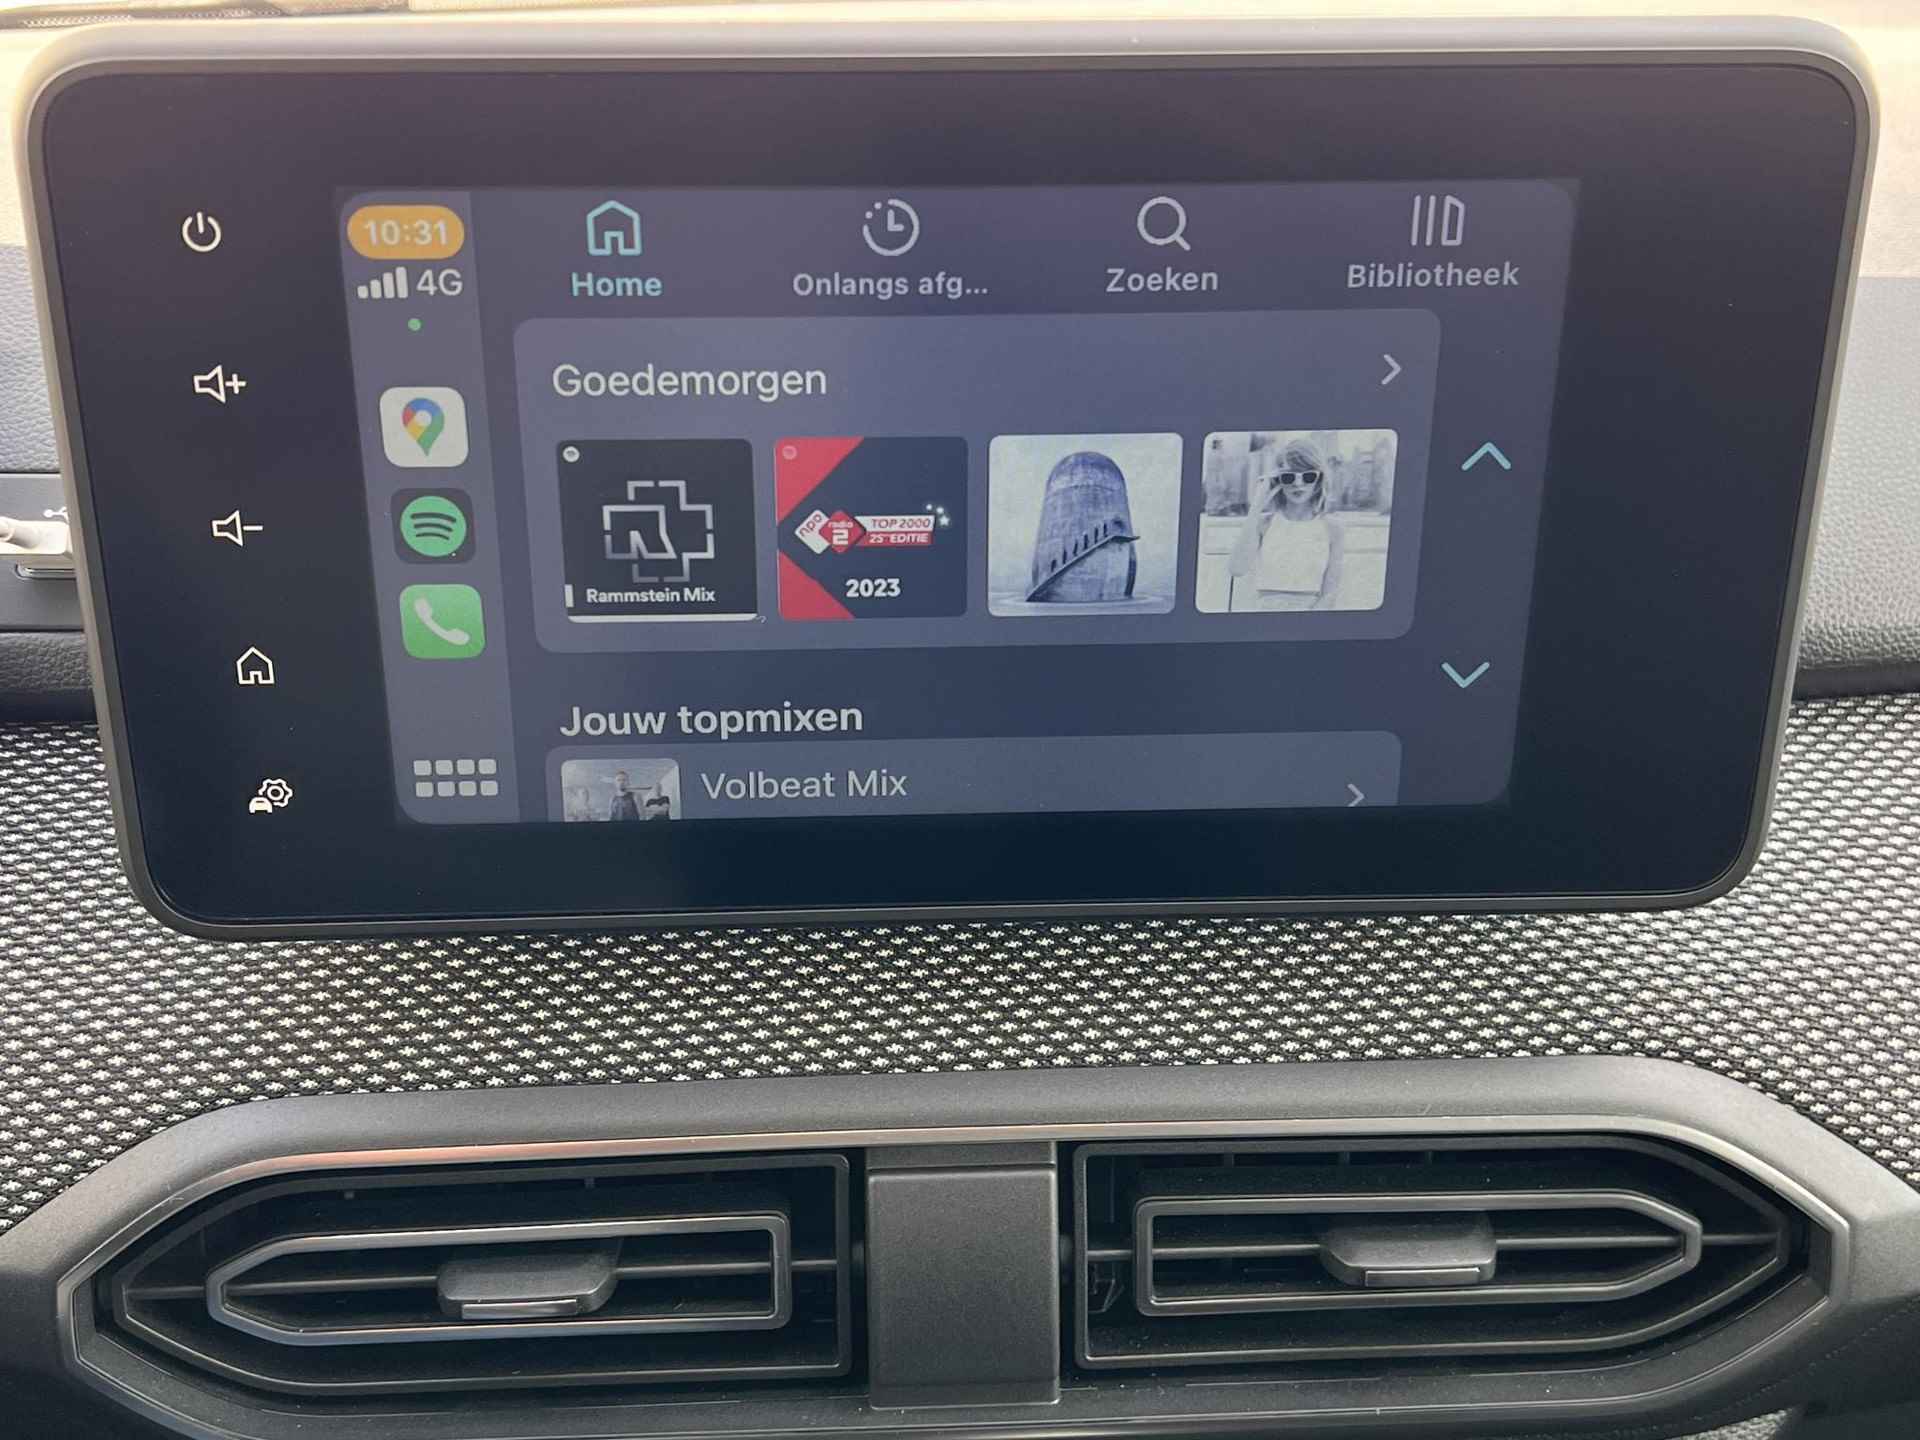 Dacia Jogger 1.0 TCe 110 Extreme 7p. / Zeven persoons / Navigatie via Apple Carplay of Android Auto / Stoelverwarming / - 39/49